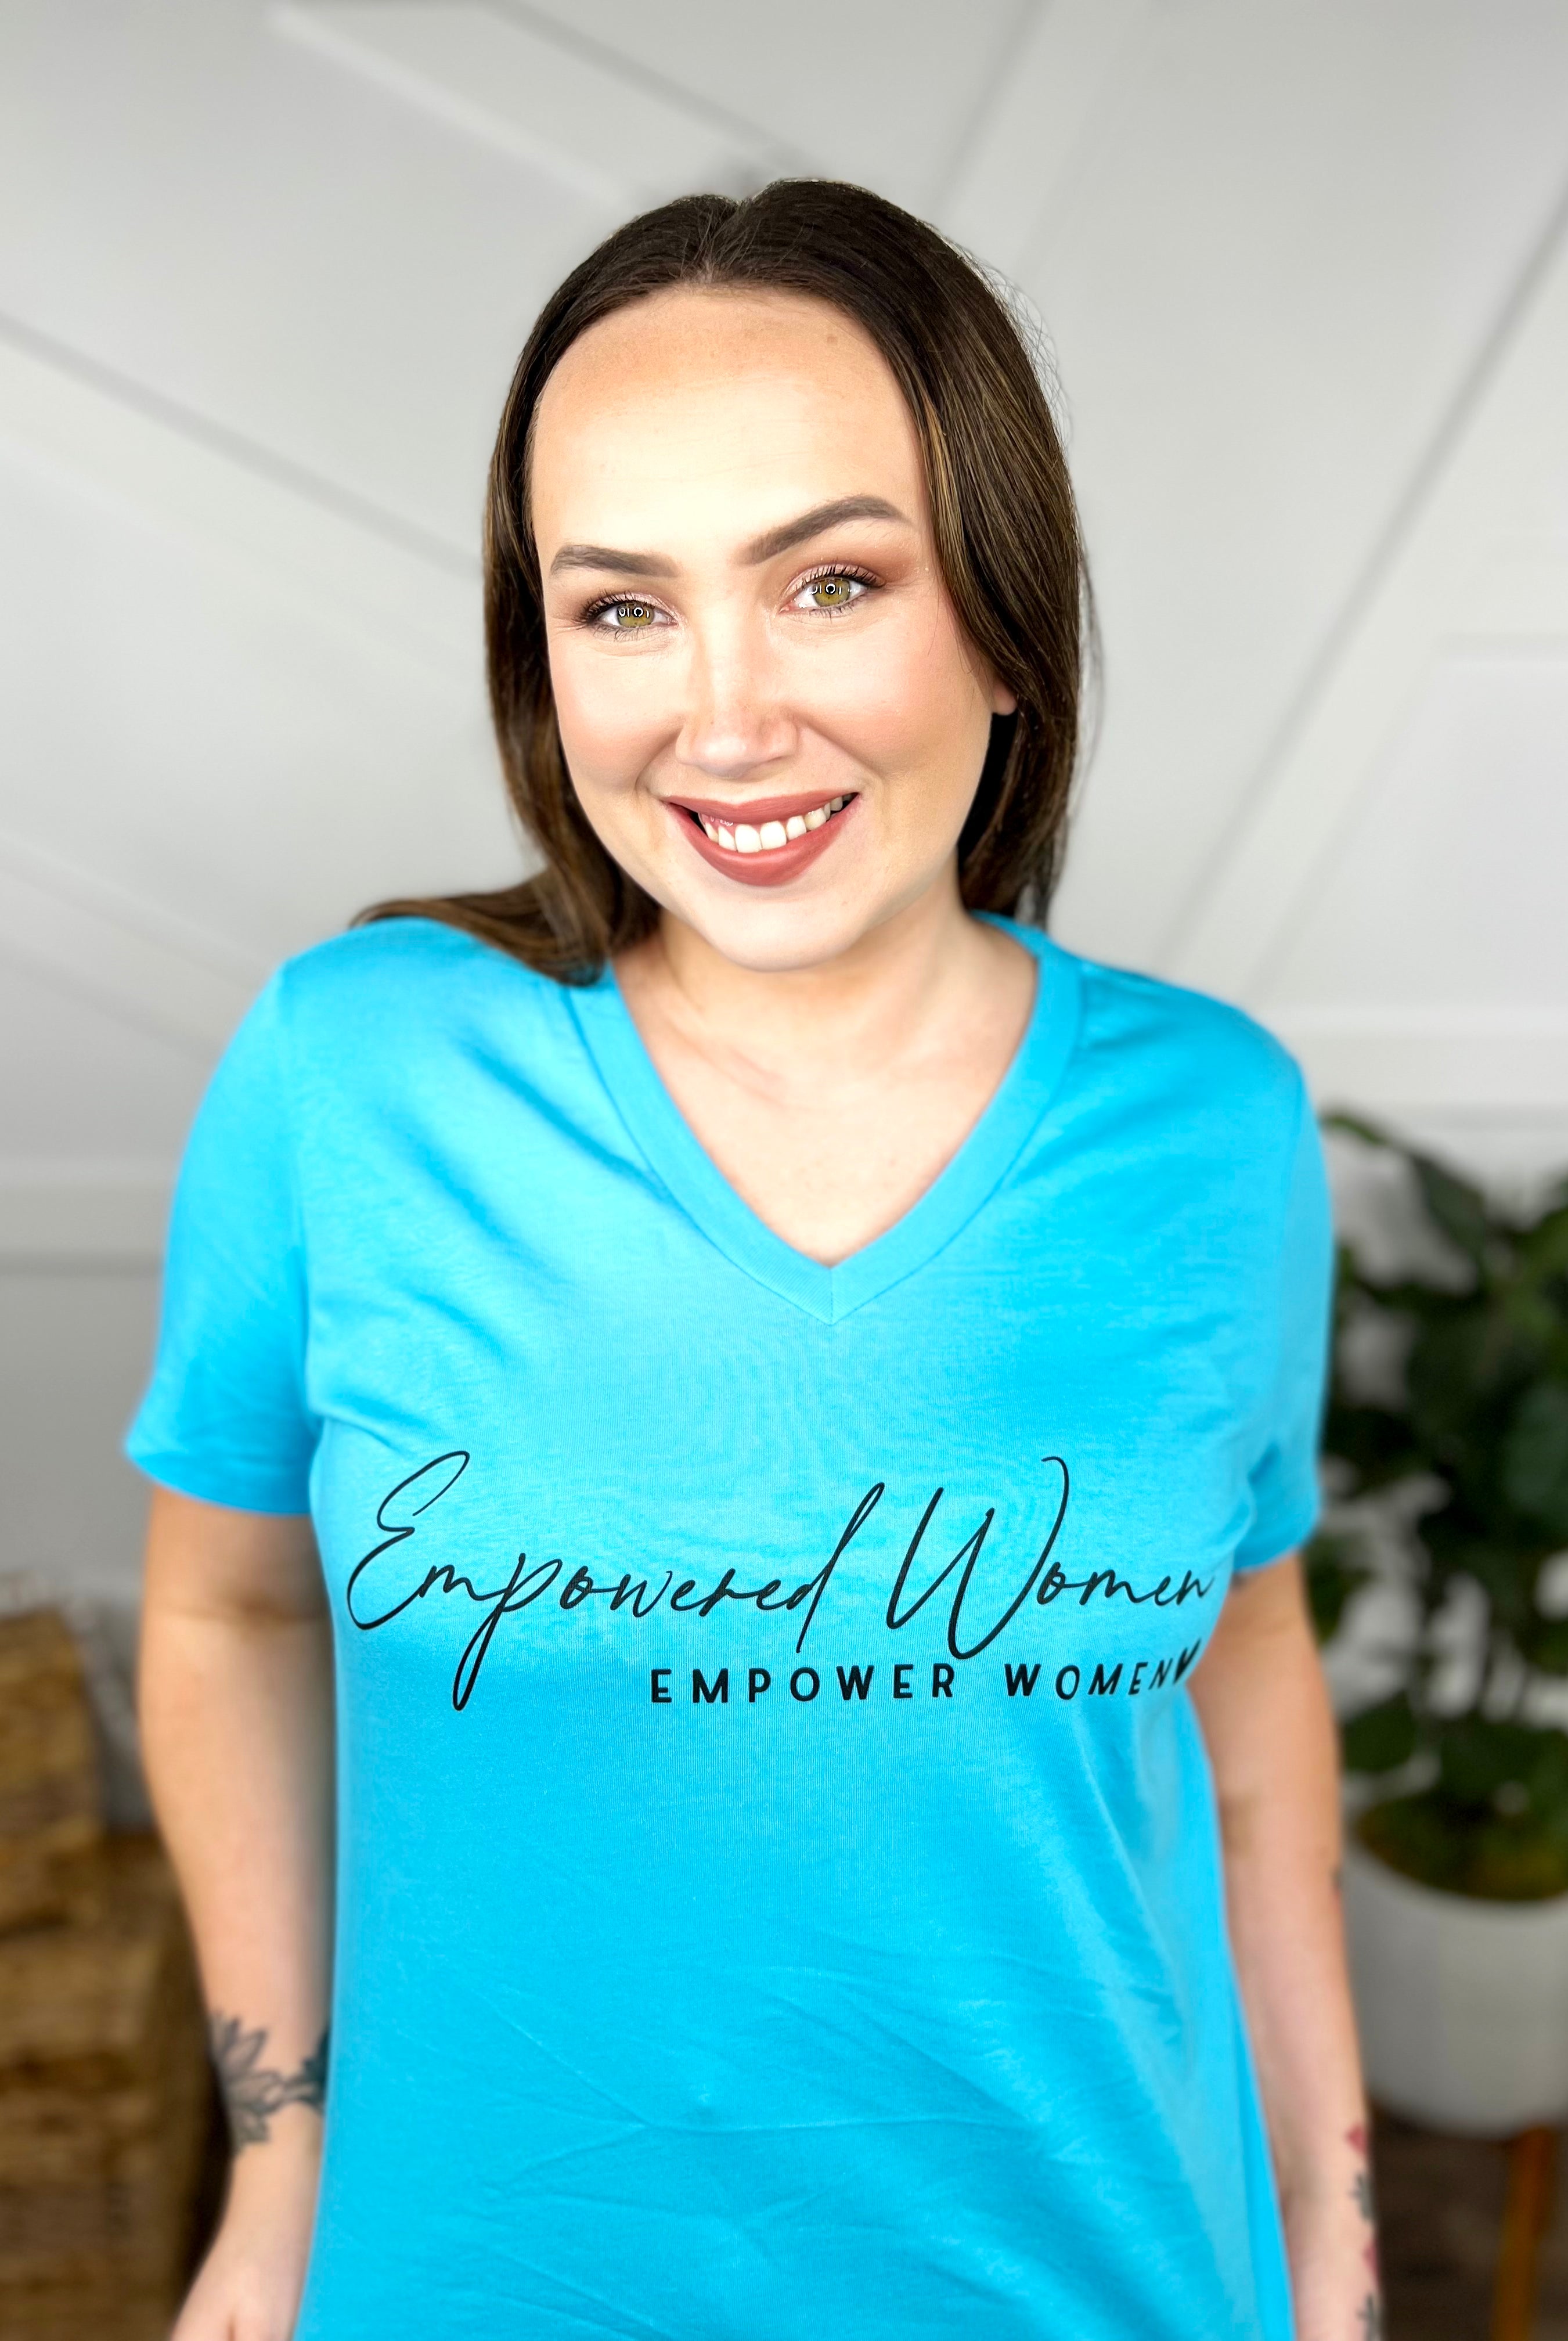 Empowered Women Graphic Tee-110 Short Sleeve Top-Heathered Boho-Heathered Boho Boutique, Women's Fashion and Accessories in Palmetto, FL